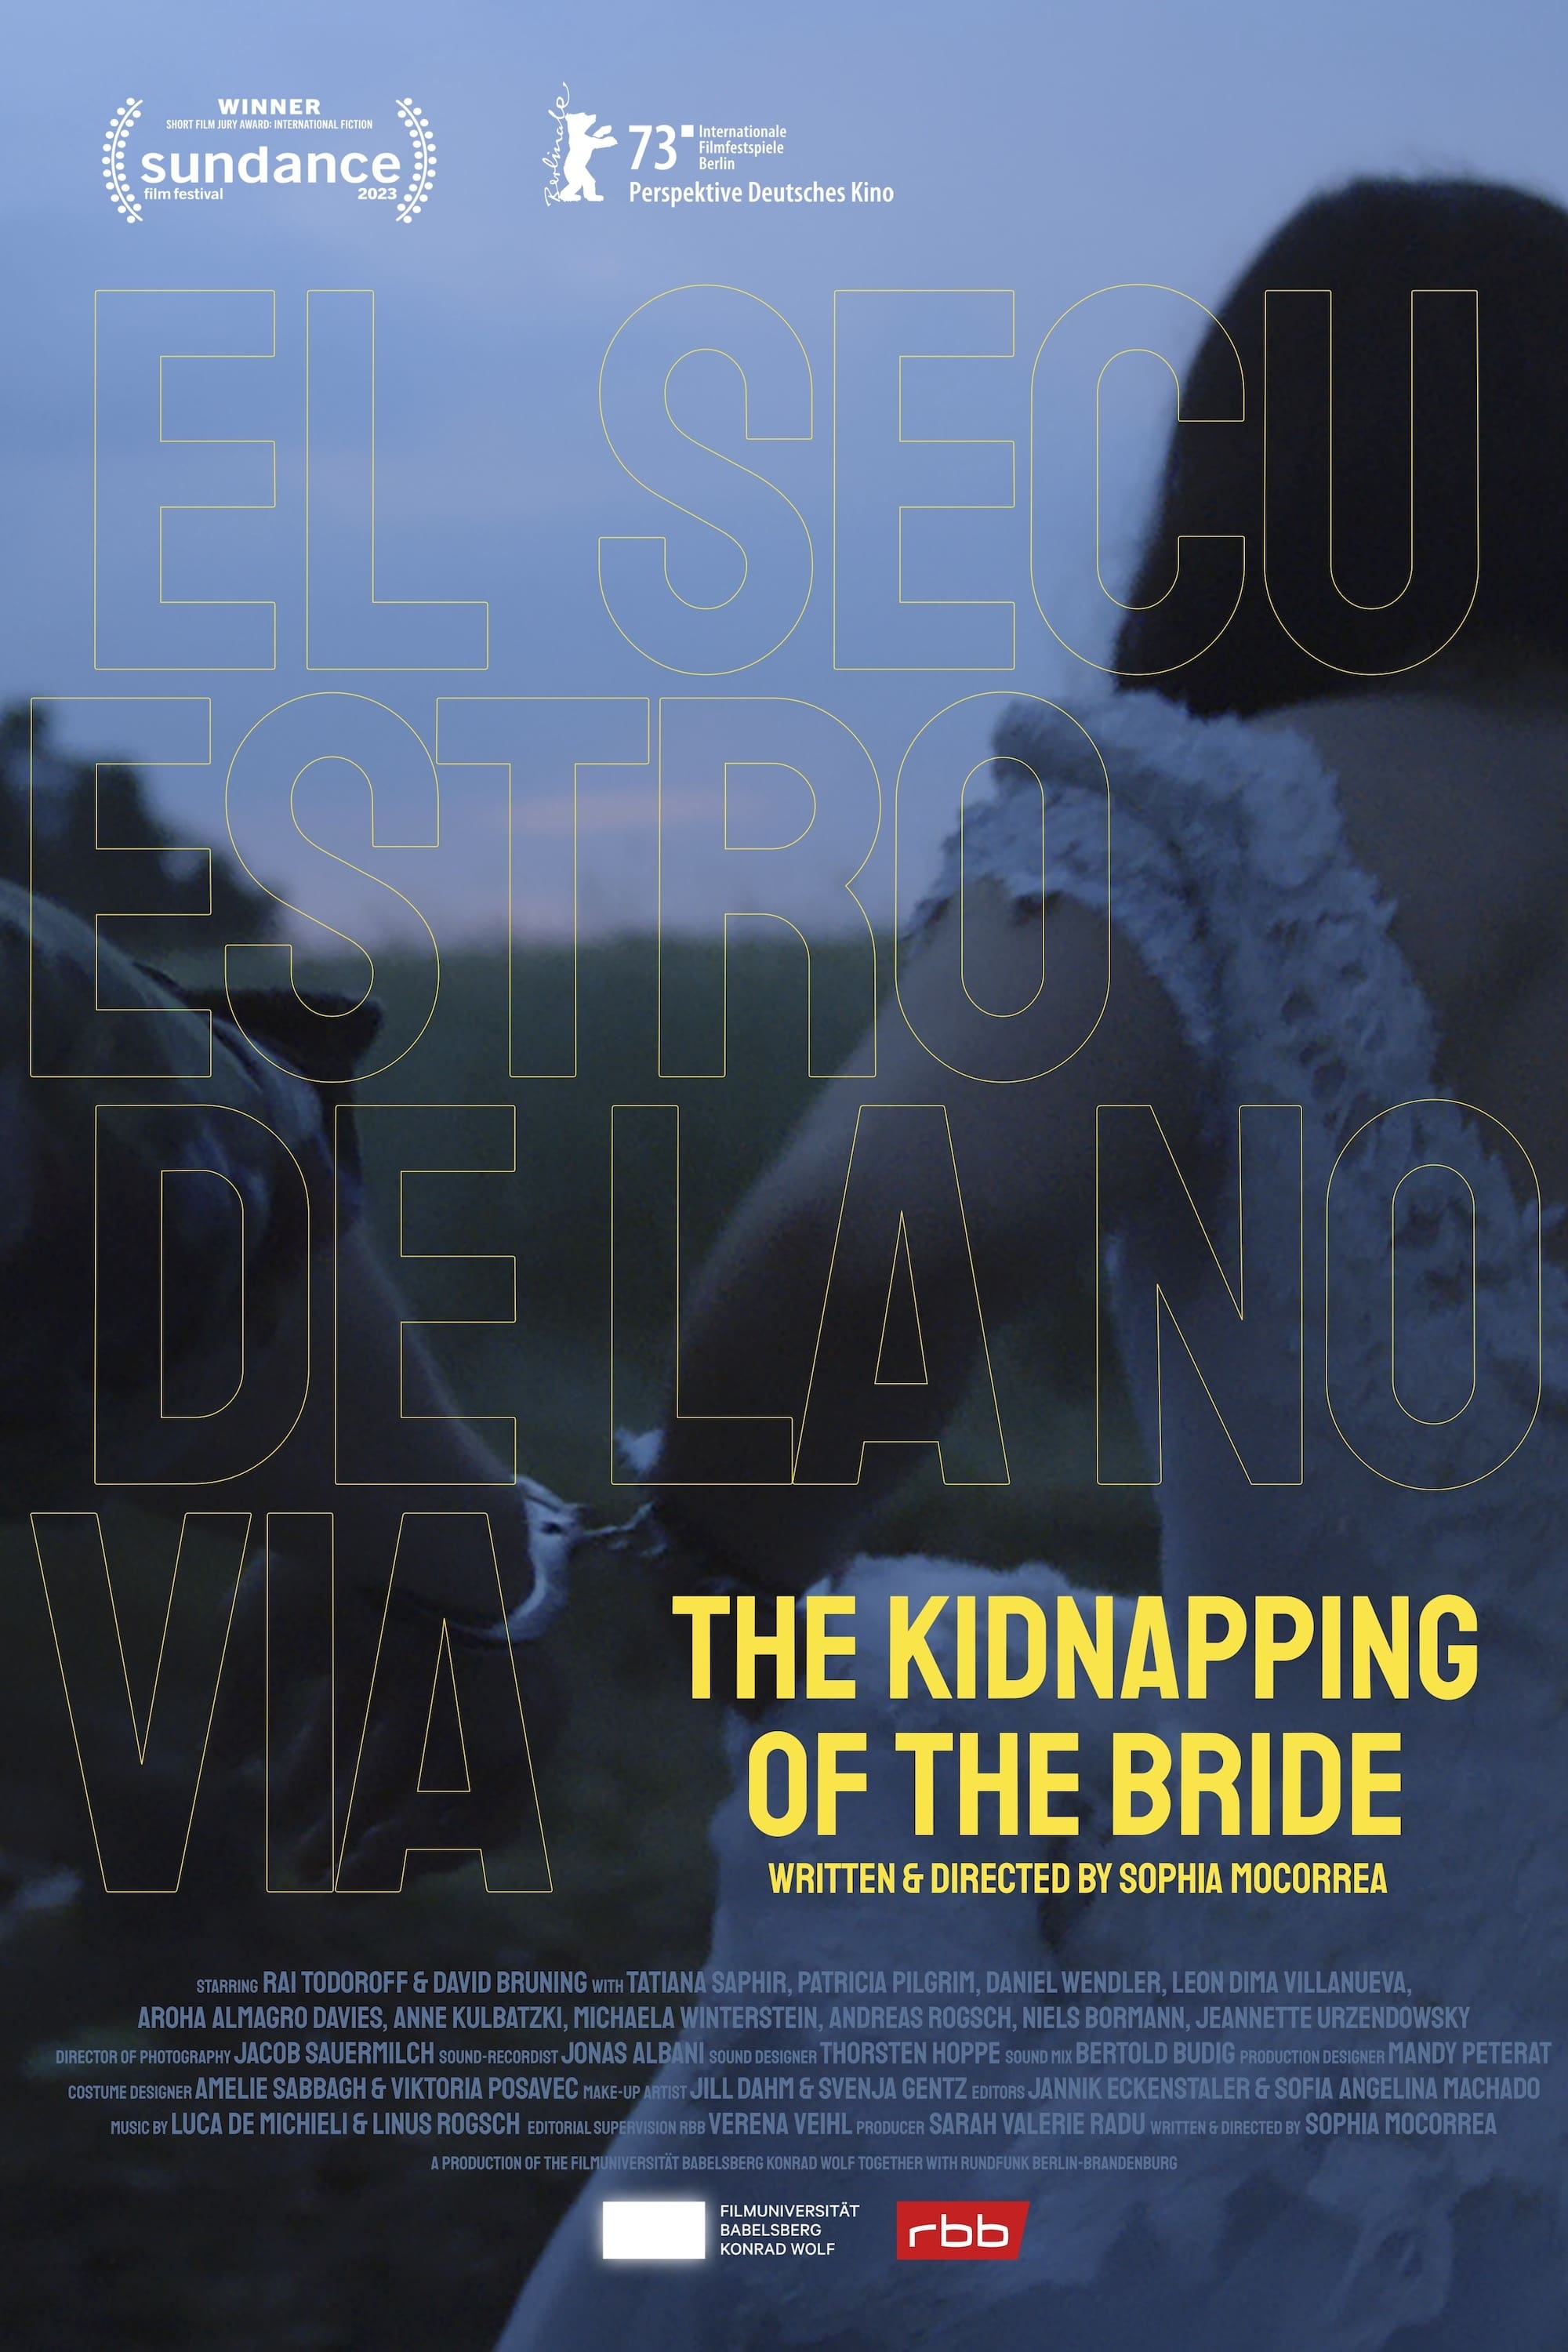 The Kidnapping of the Bride